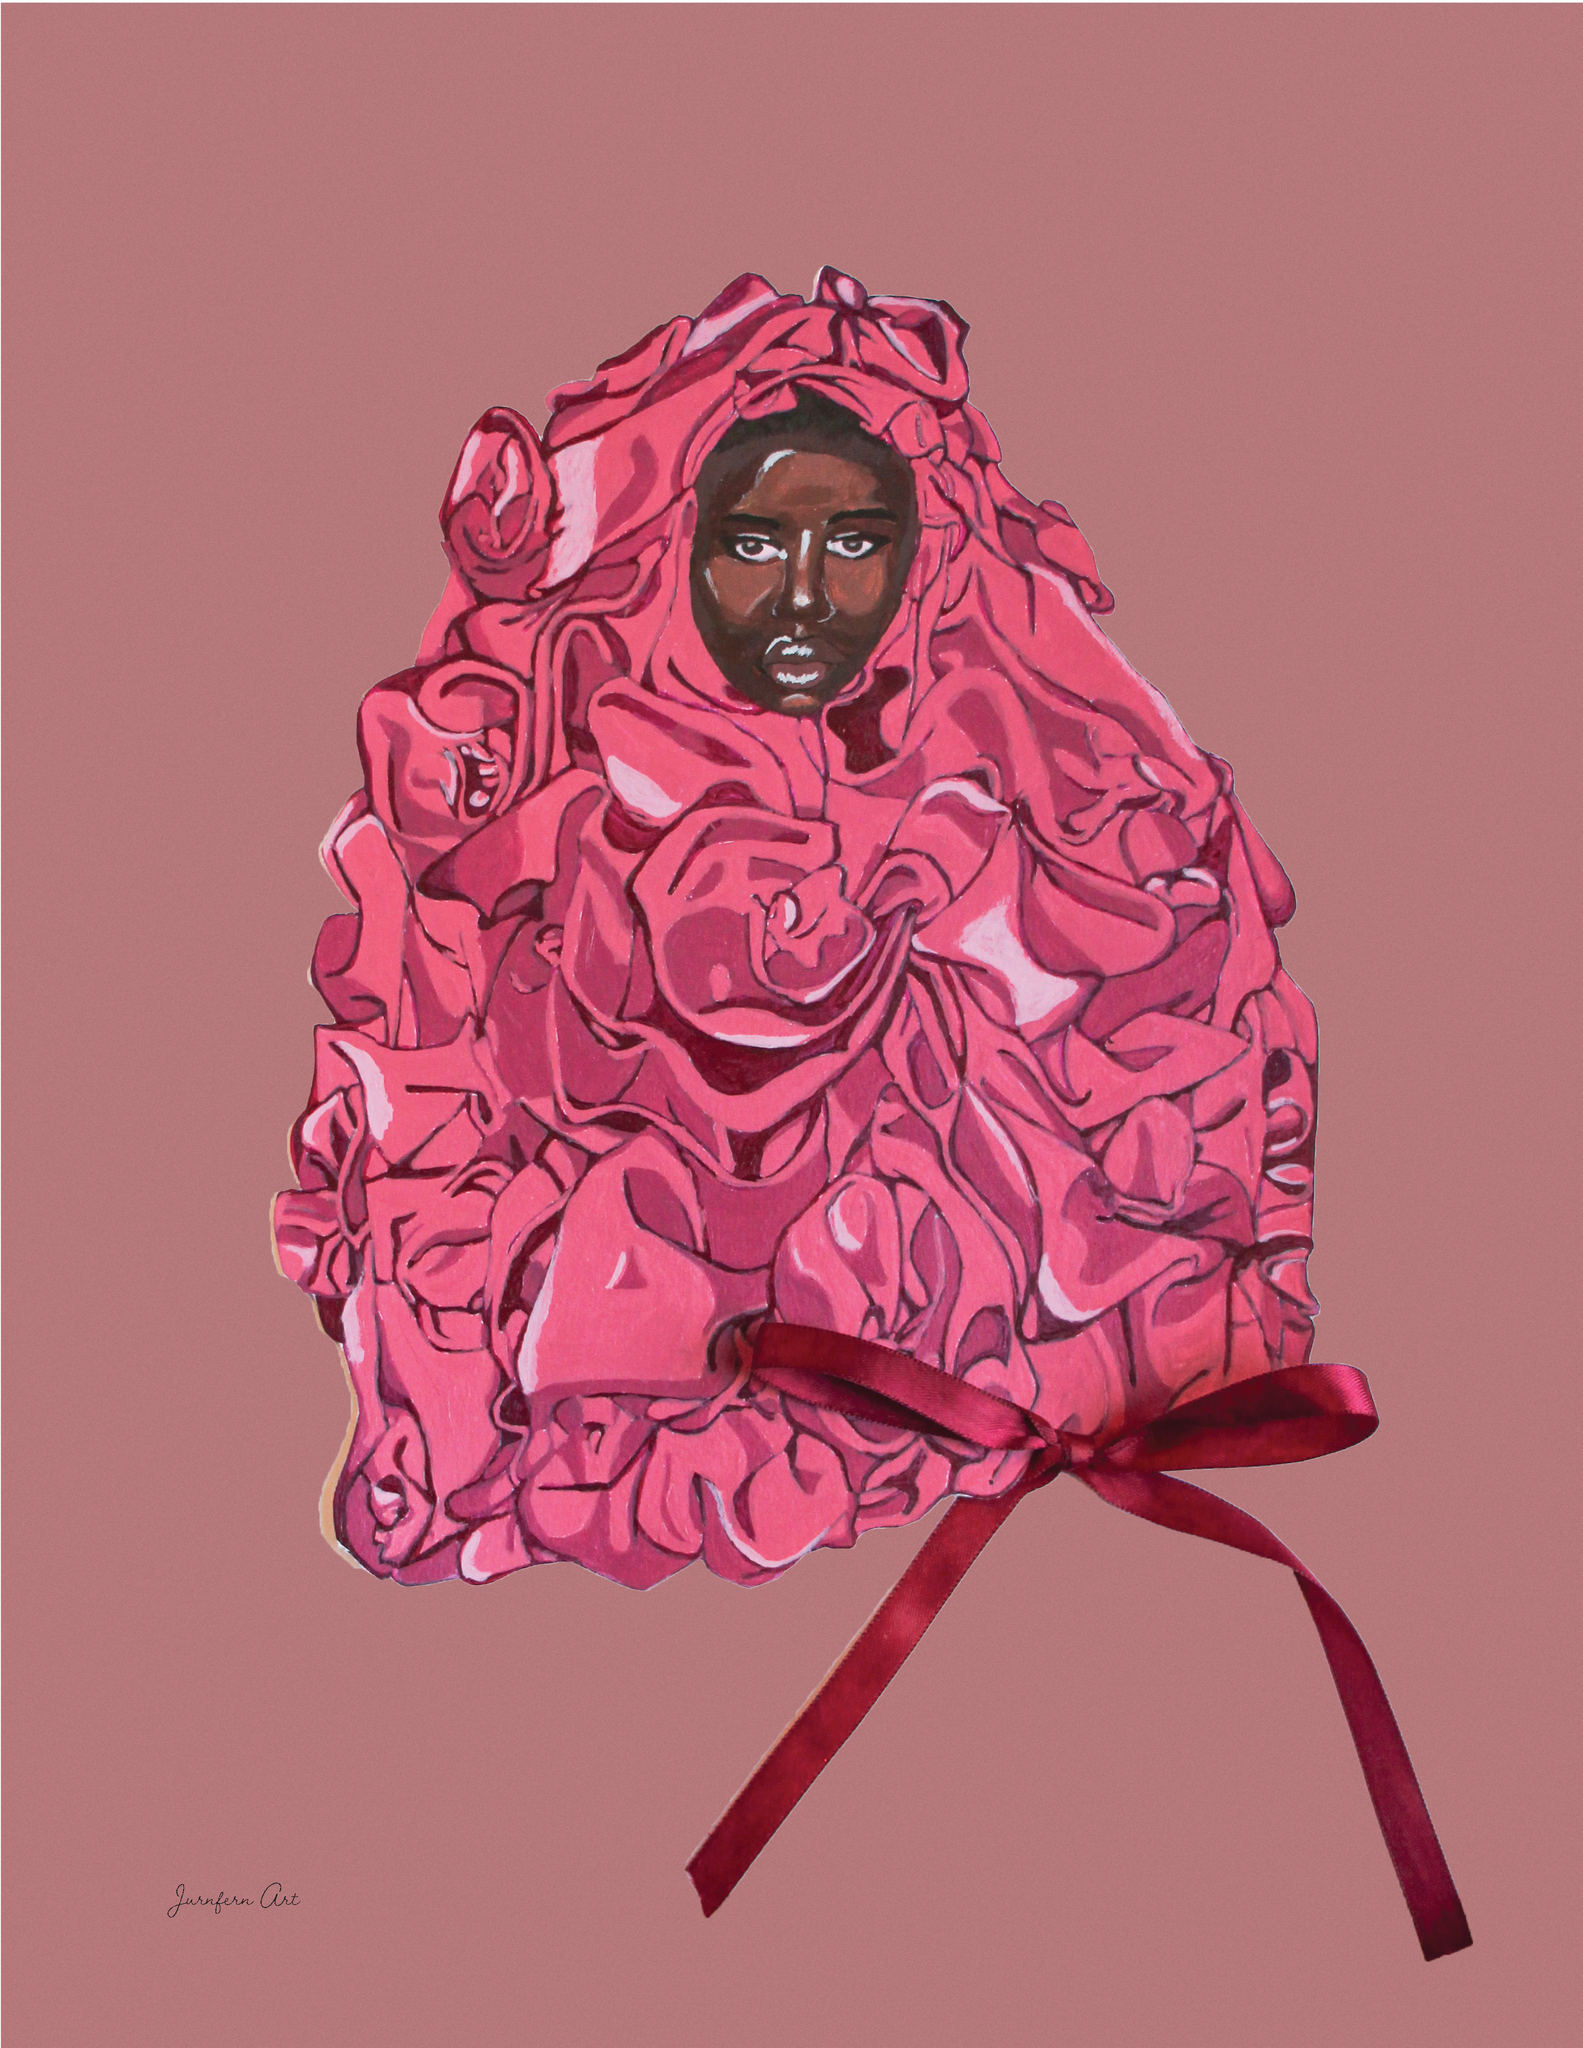 An art print with an illustration of Black supermodel Adut Akech wearing a pink Valentino gown with a bow on it, with a pink background